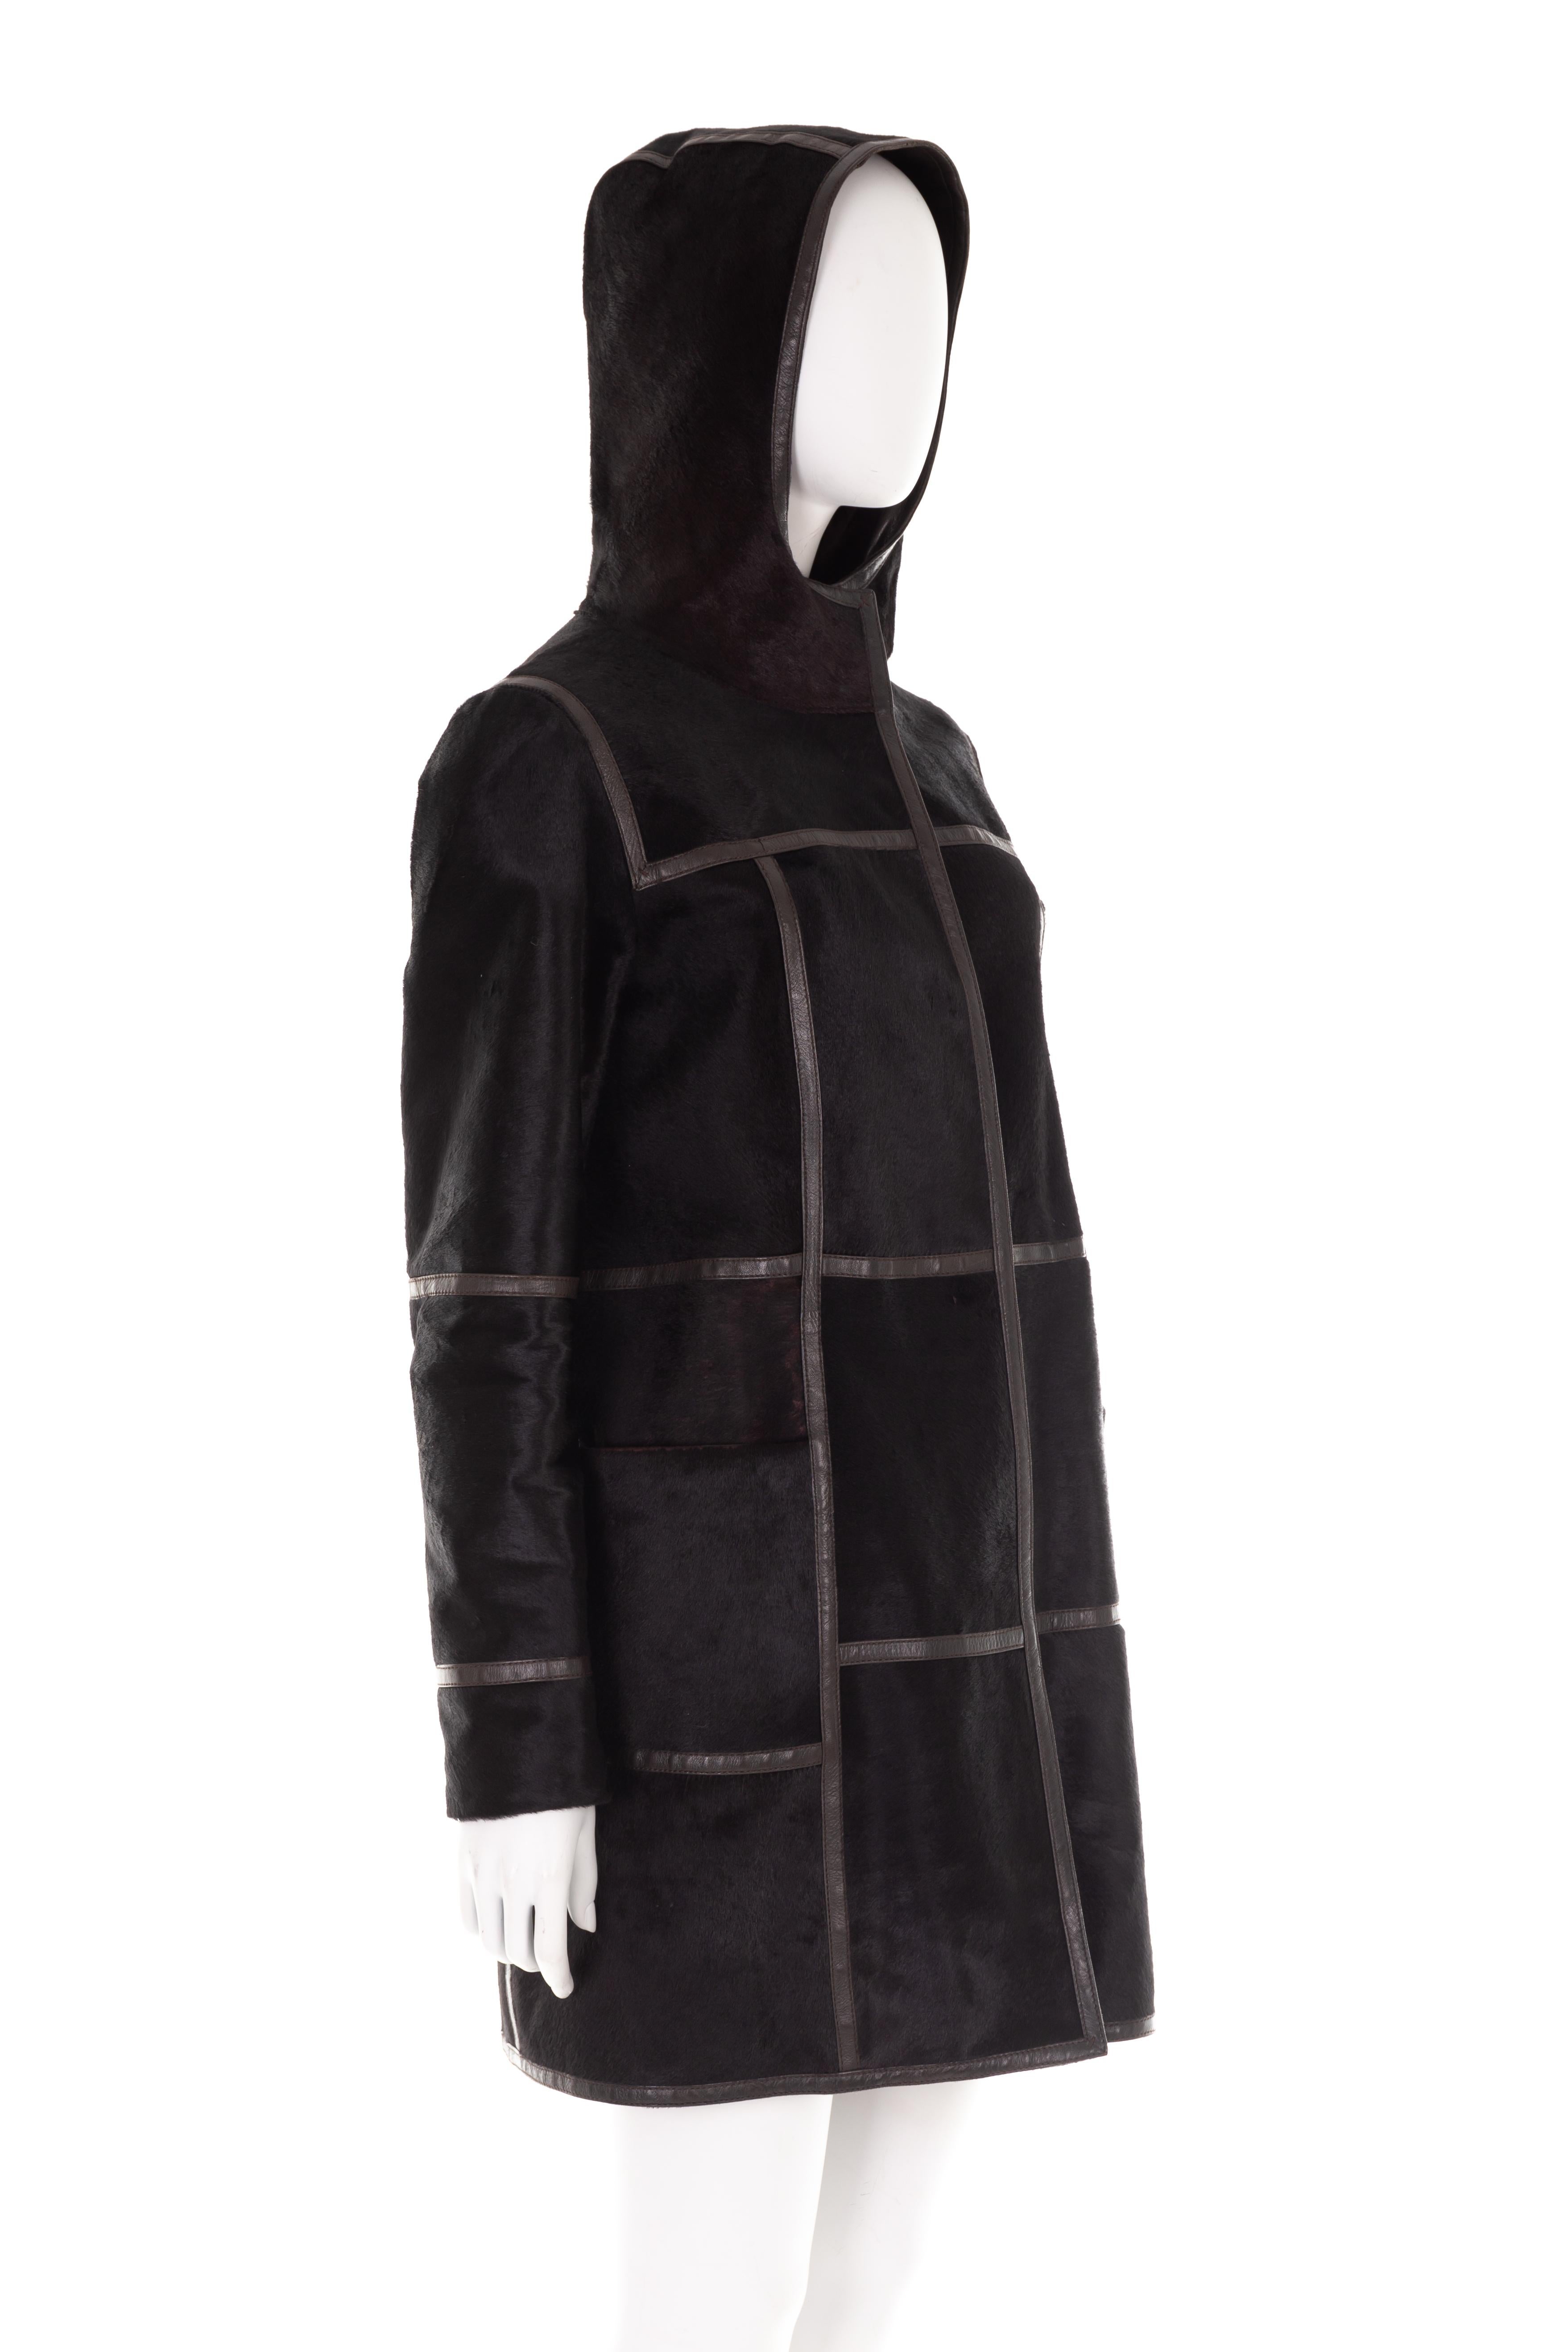 Prada by Miuccia Prada F/W 2005 black calfskin hooded coat  In Excellent Condition For Sale In Rome, IT